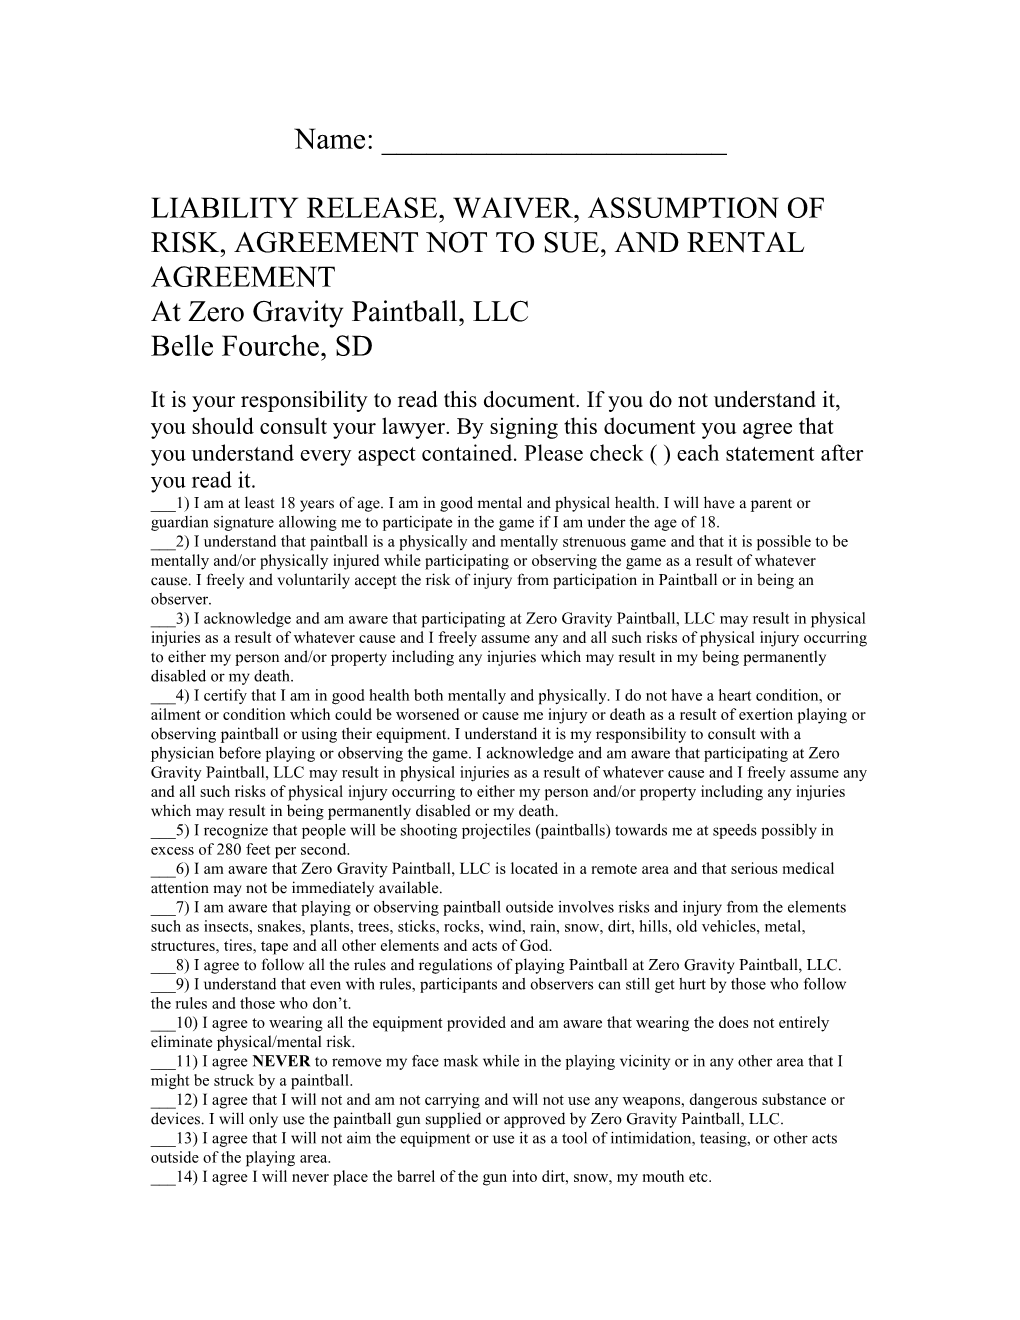 Liability Release, Waiver, Assumption Of